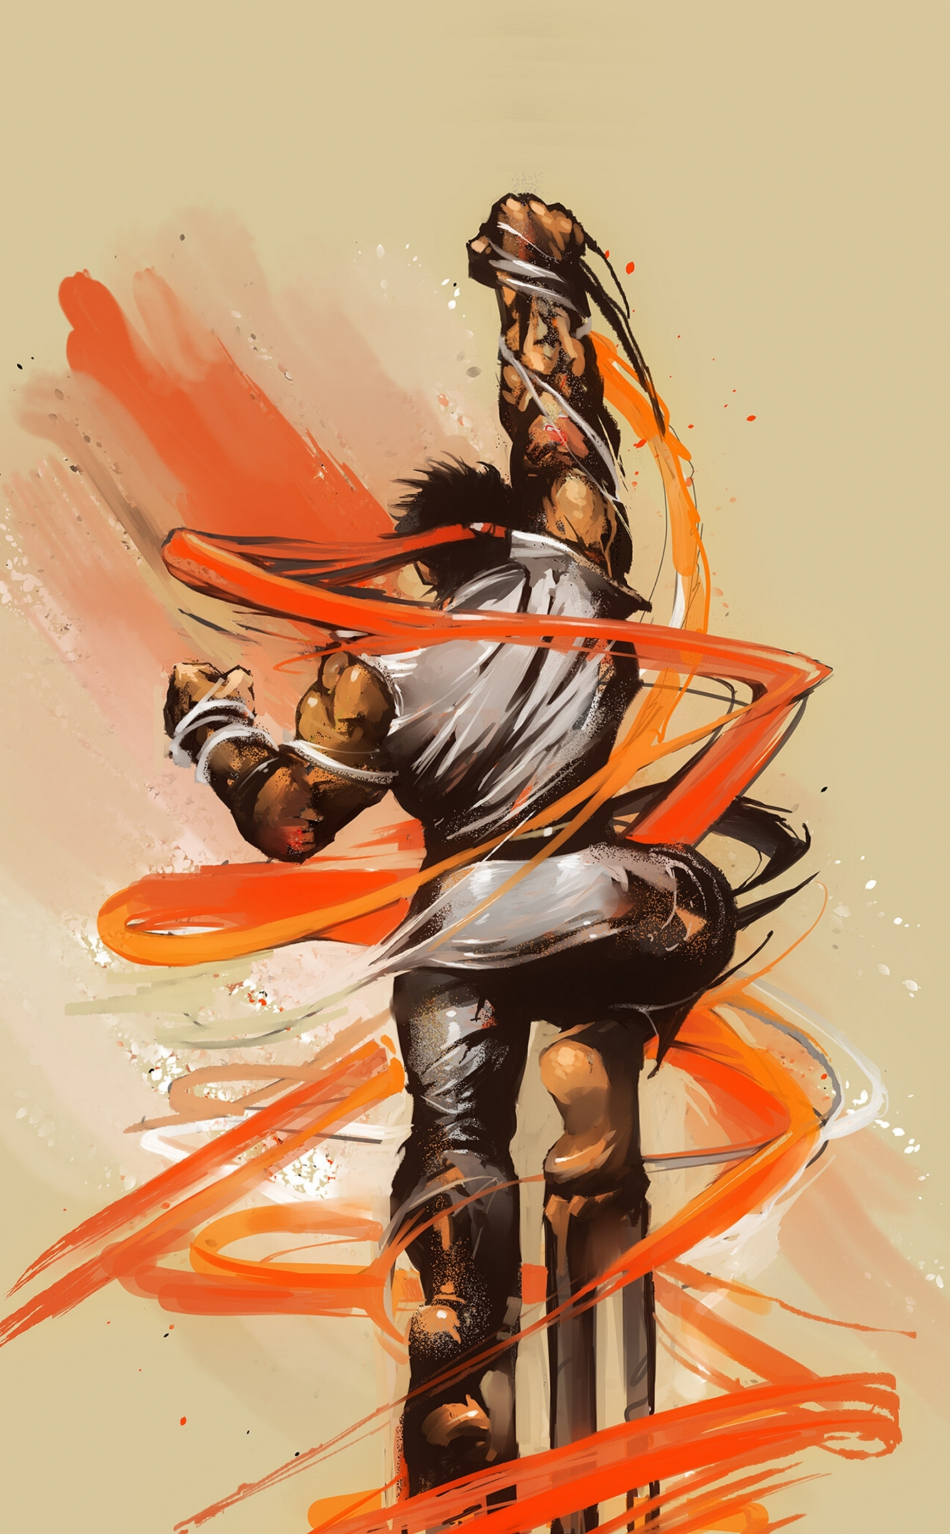 Download Wallpaper 950x1534 Ryu Street Fighter Video Game Art Iphone 950x1534 Hd Background